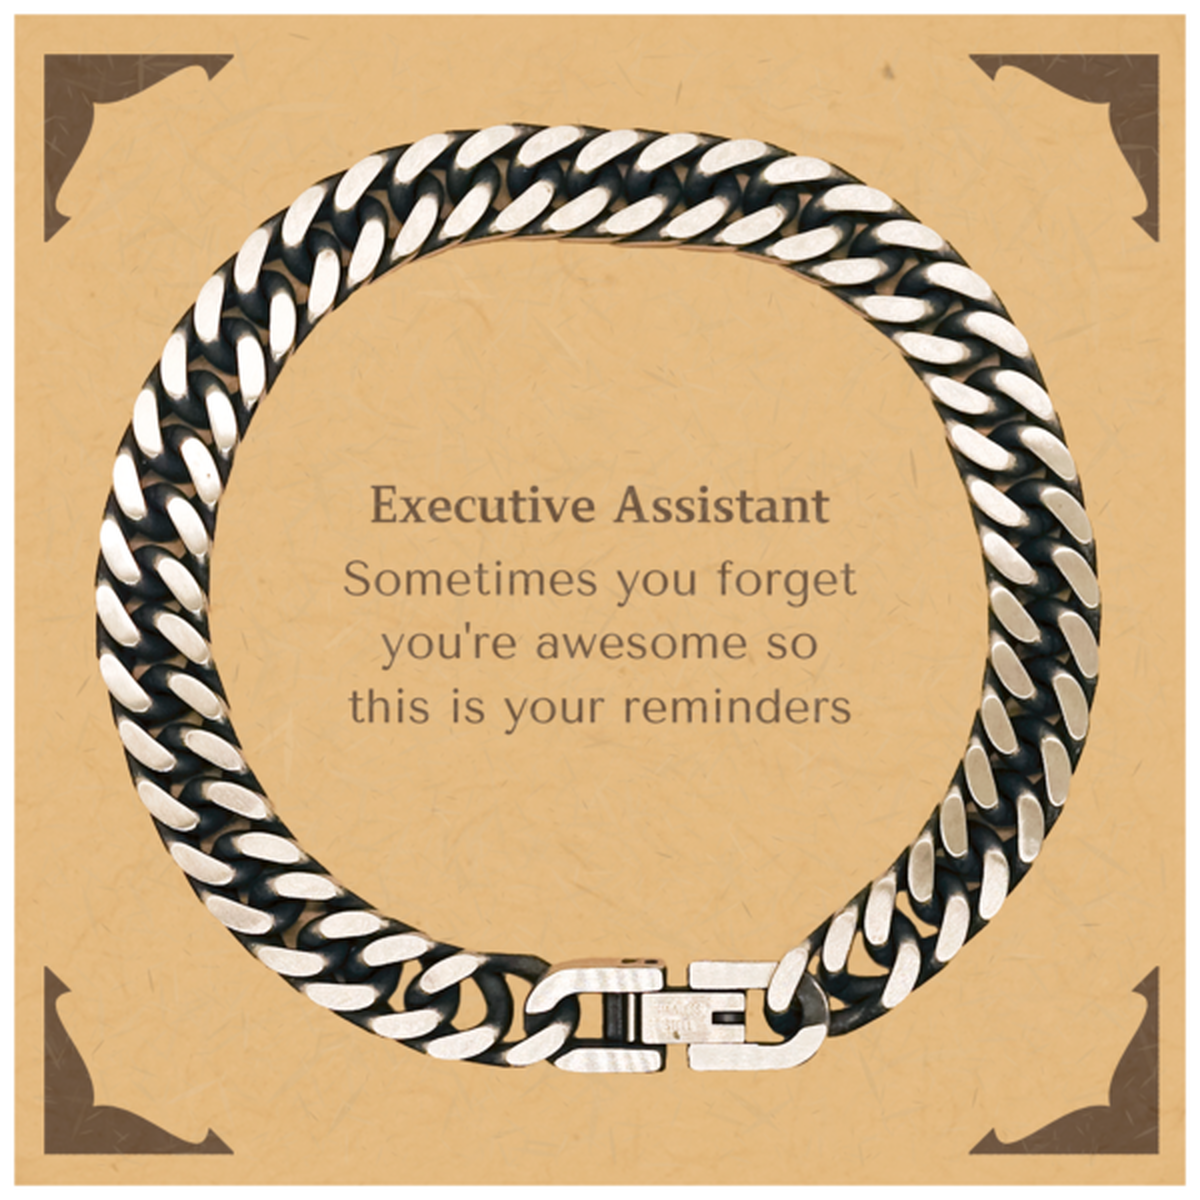 Sentimental Executive Assistant Cuban Link Chain Bracelet, Executive Assistant Sometimes you forget you're awesome so this is your reminders, Graduation Christmas Birthday Gifts for Executive Assistant, Men, Women, Coworkers